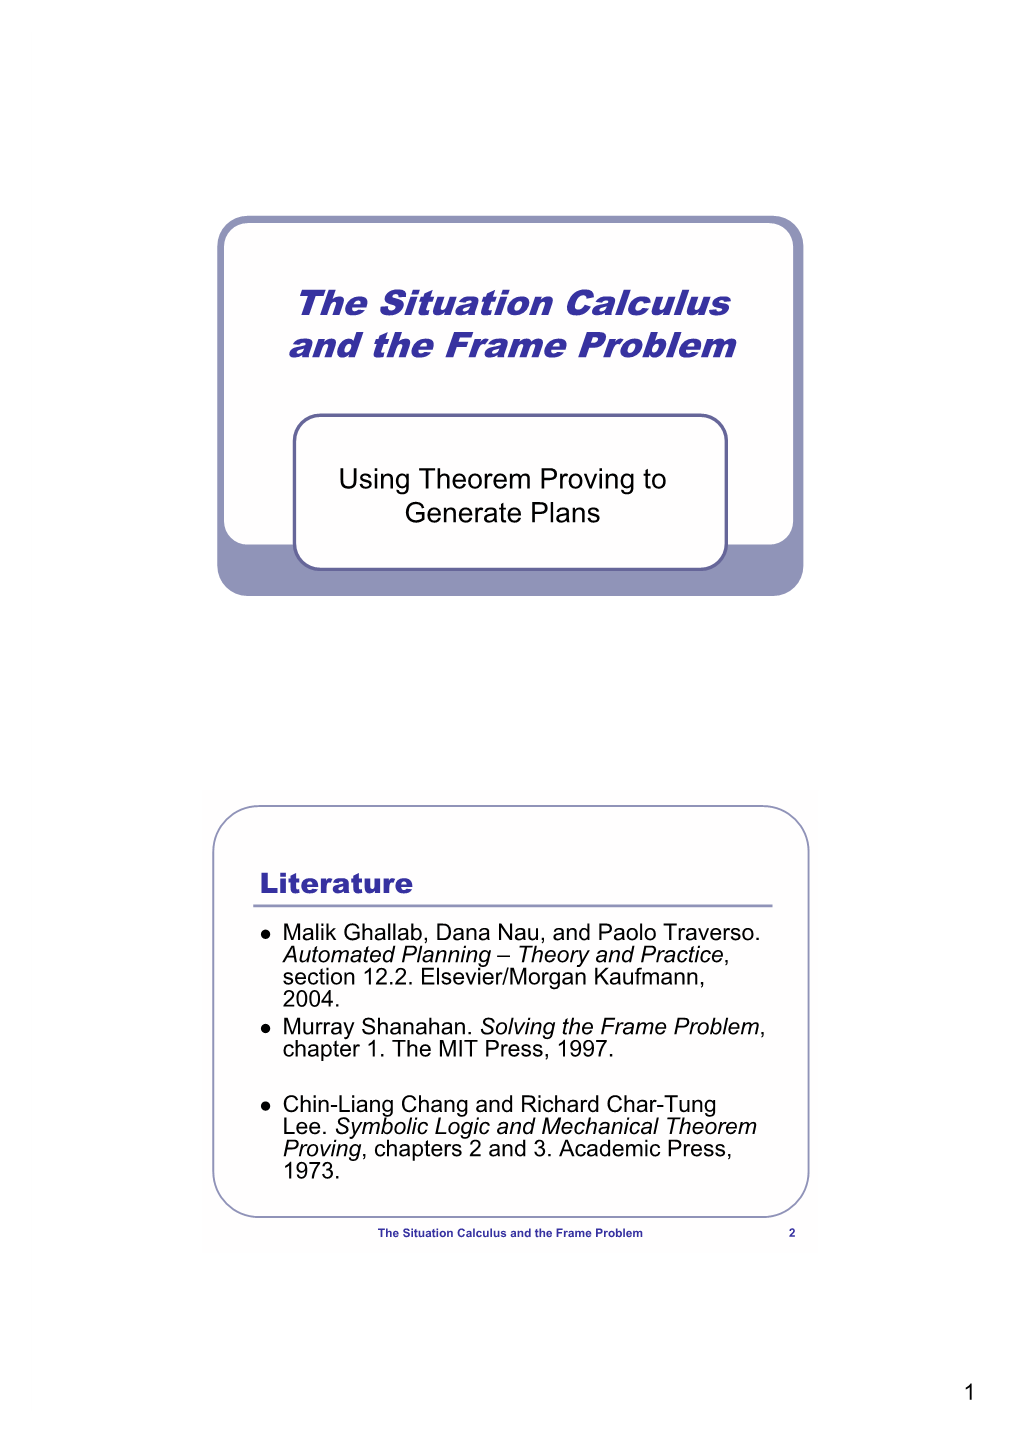 The Situation Calculus and the Frame Problem